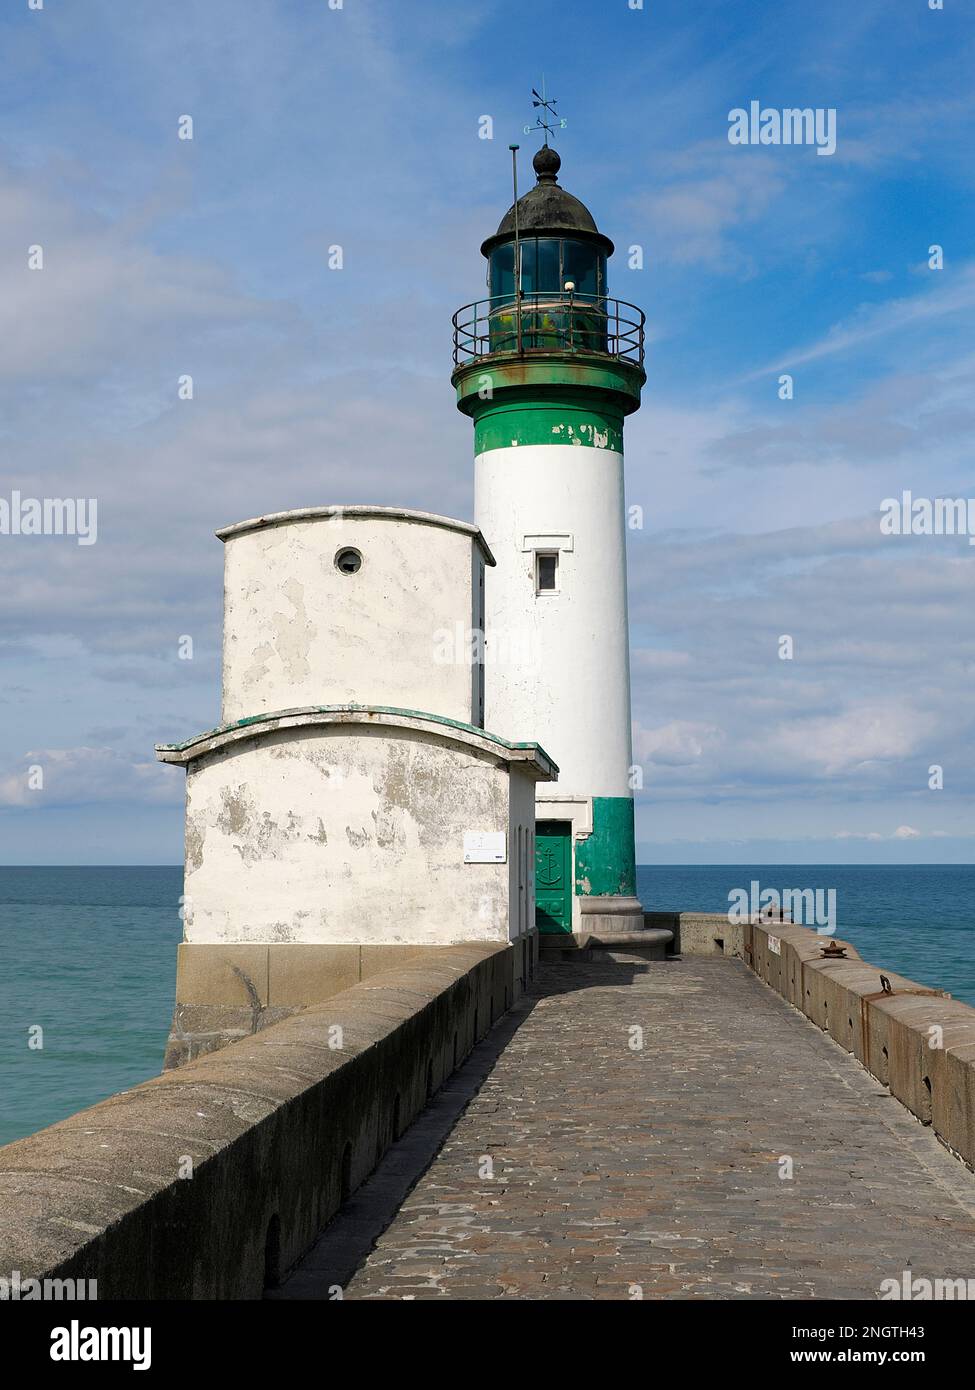 Lighthouse of Le Treport, a commune in the Seine-Maritime department in Normandy, in northwestern France. Stock Photo